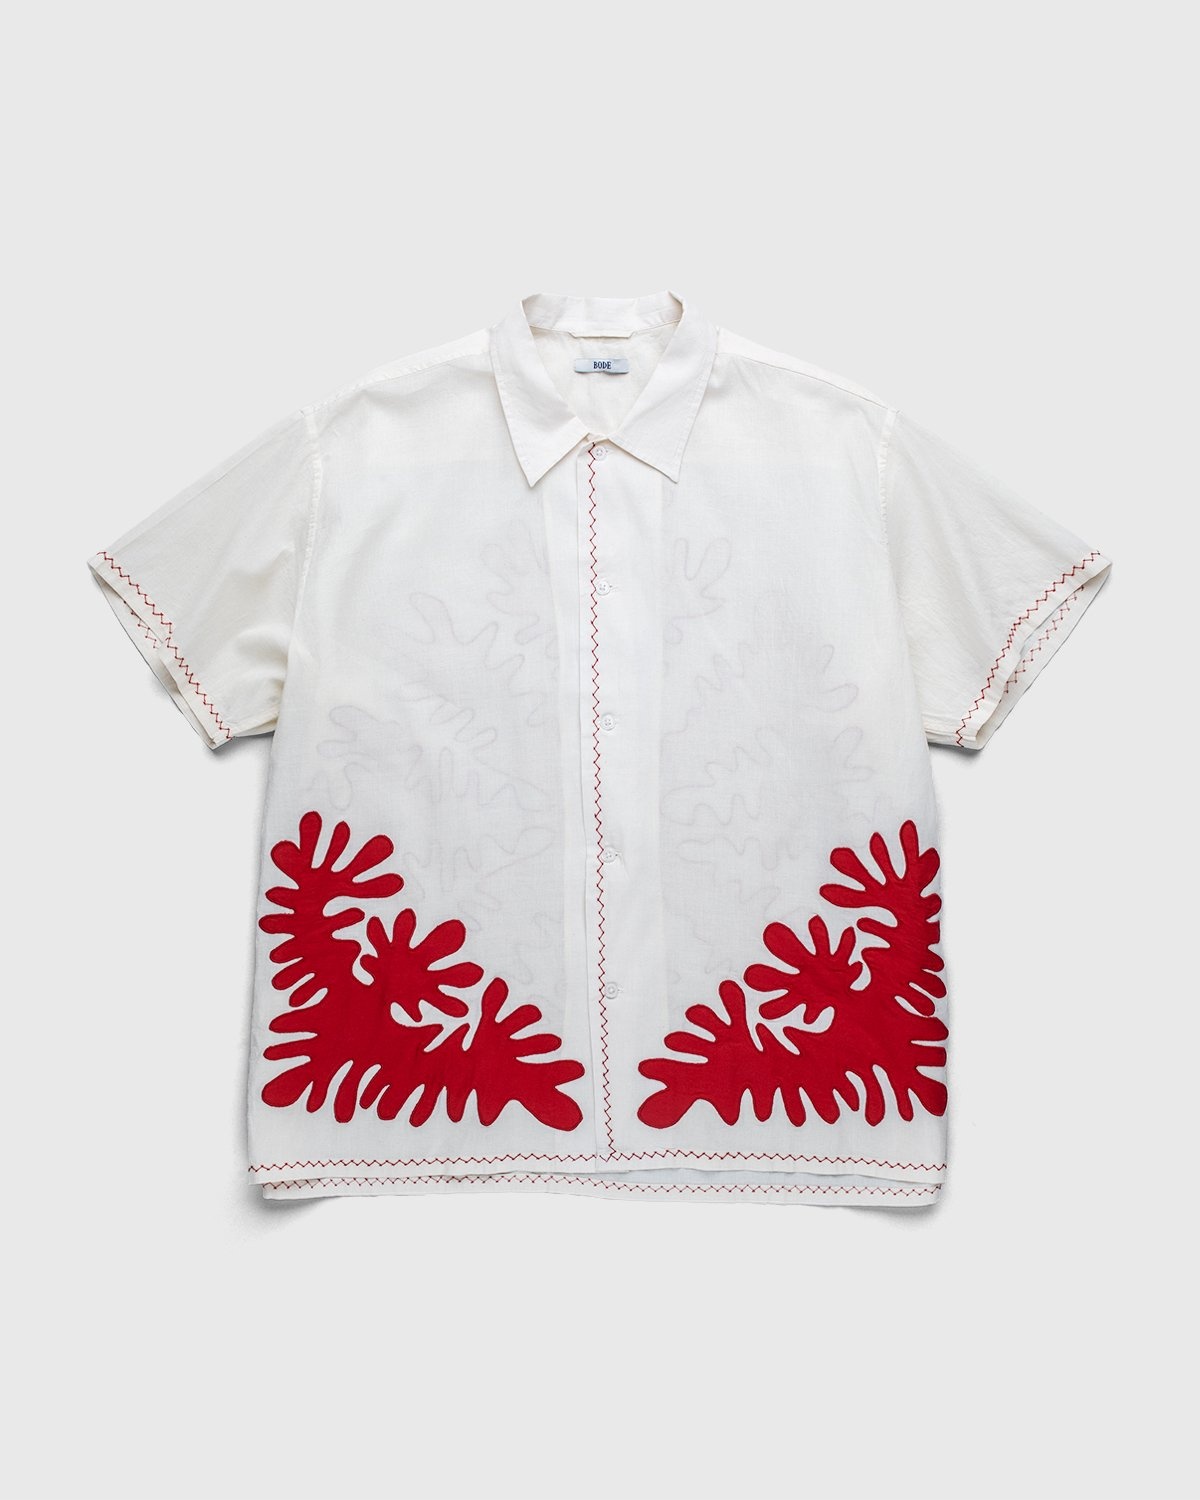 Natural Bode Setting Cut-Out S/S Red Shop Shirt – Highsnobiety Appliqué |